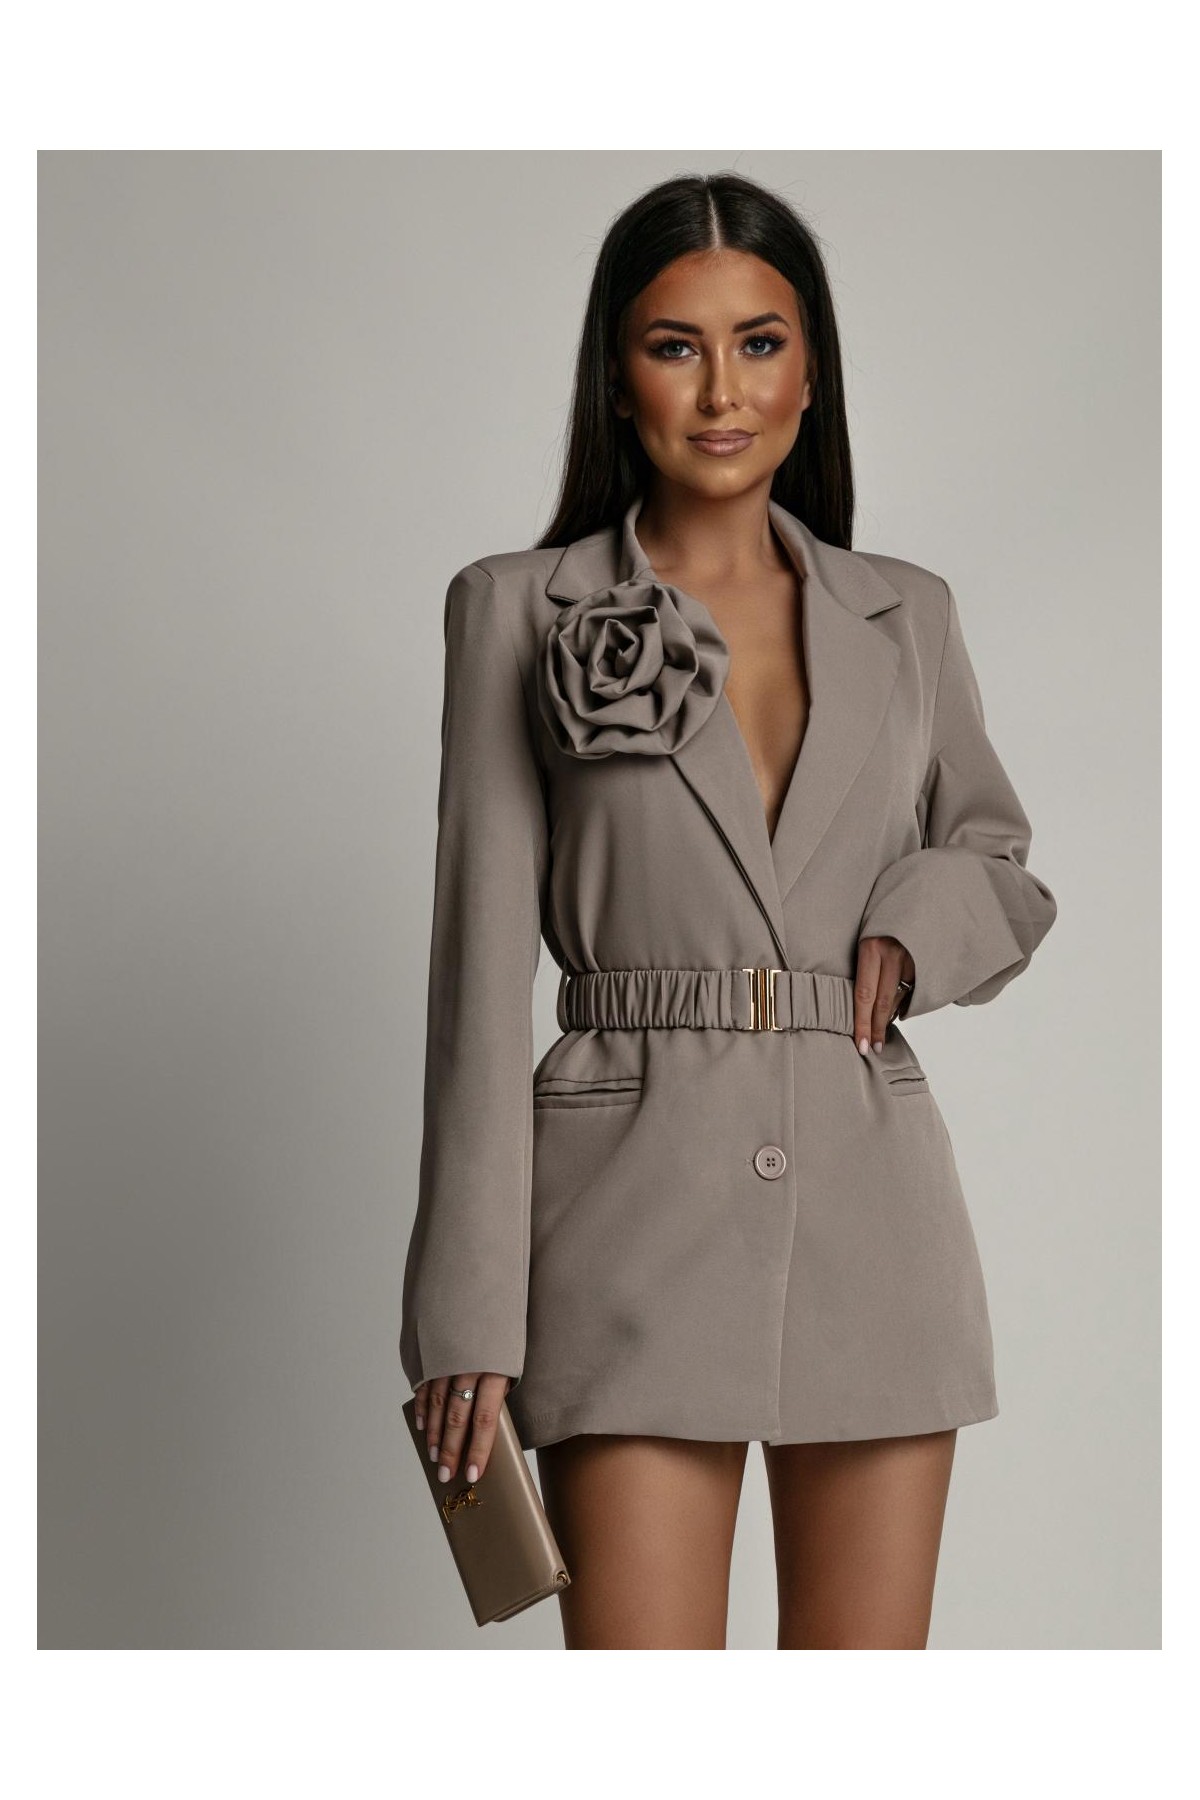 Women's blazer with belt and cappuccino flower